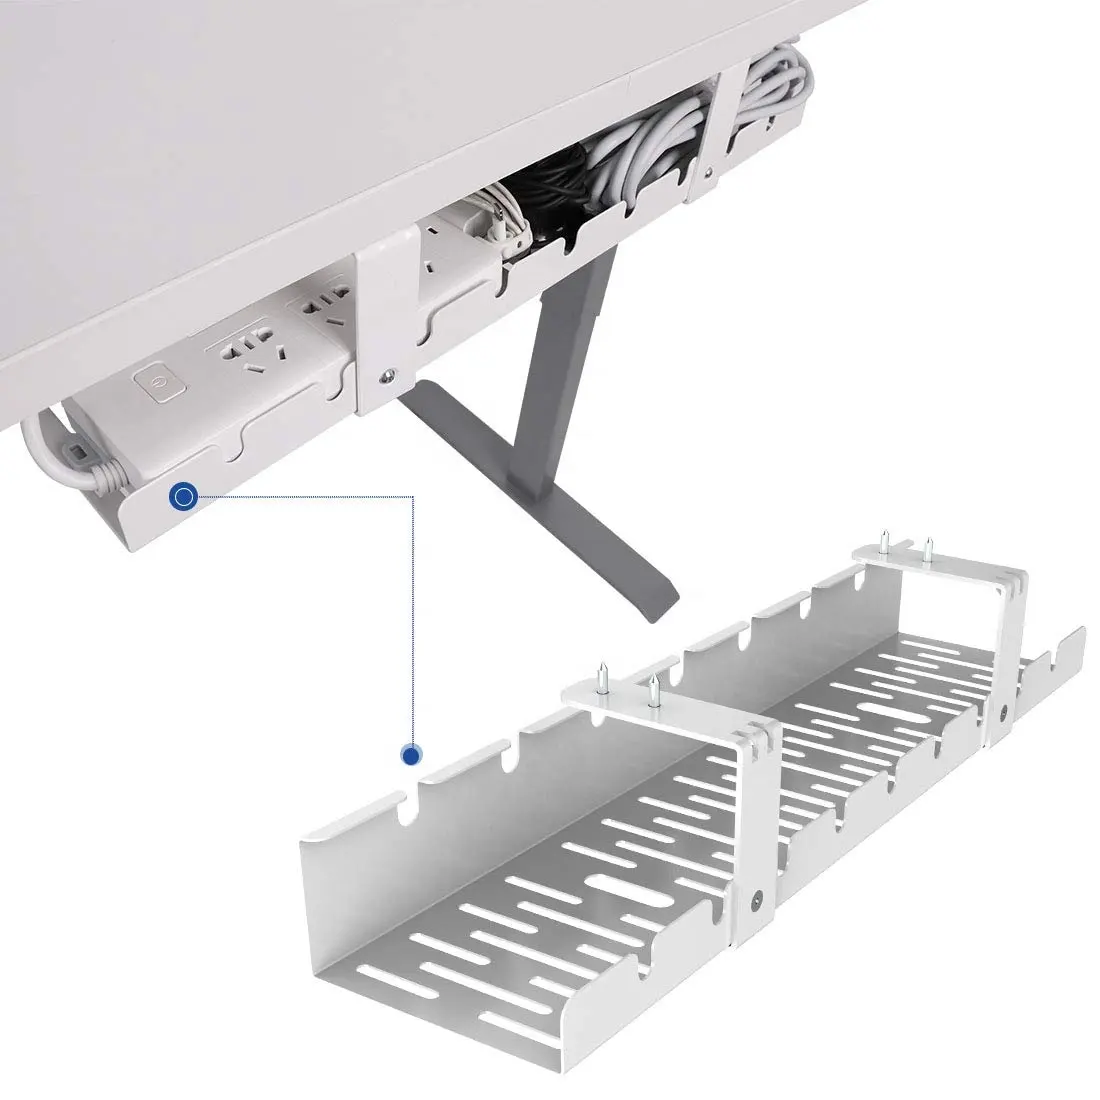 Tray Cords Baskets Holders Cable Ties Metal Cable Organizer Under Desk Cable Management Tray